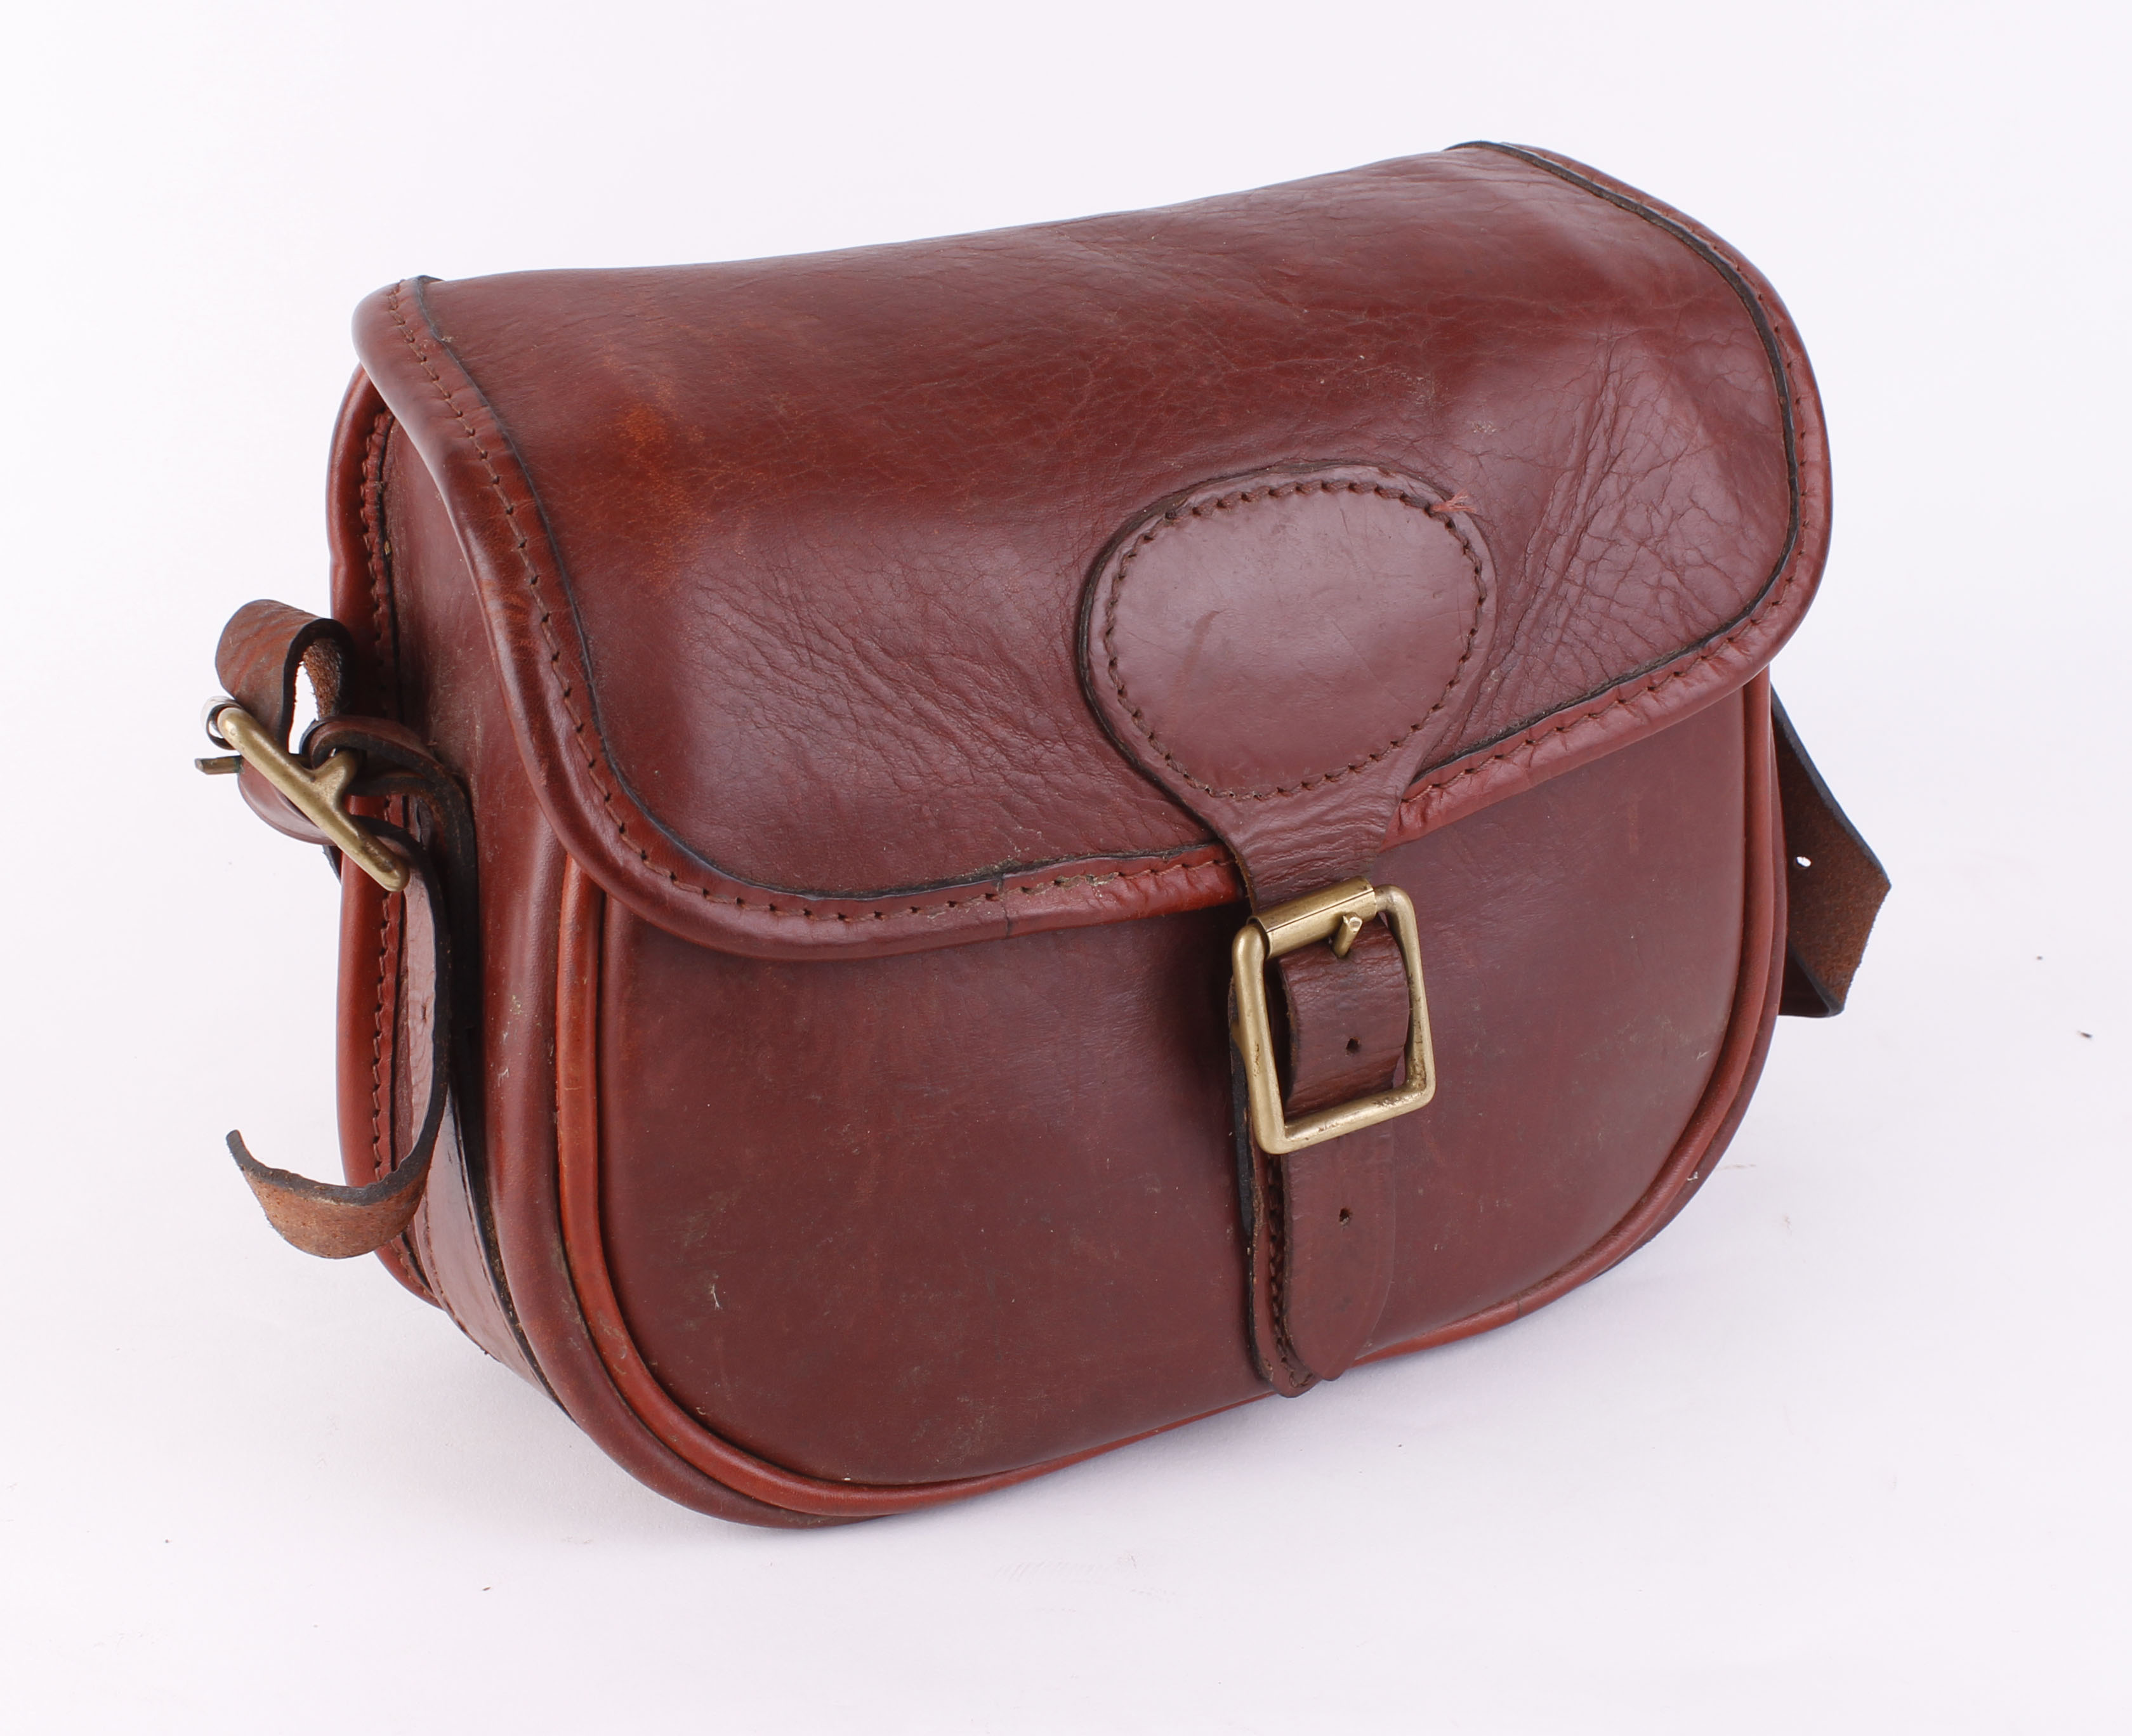 Parsons red leather cartridge bag (capacity for 100 cartridges approx.)